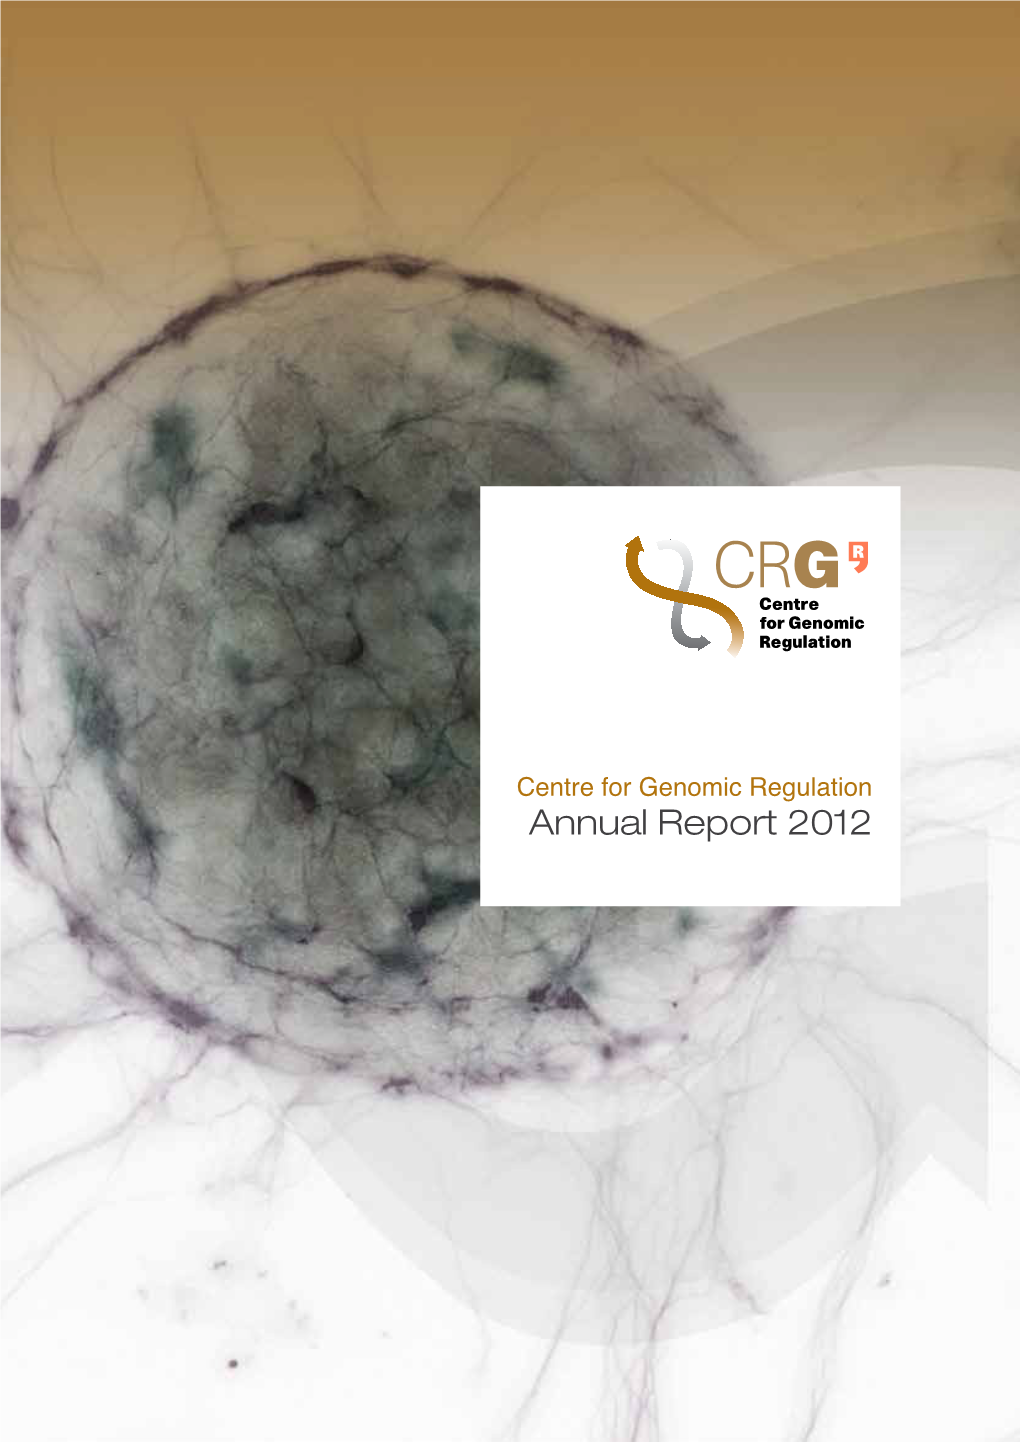 Download the Annual Report 2012